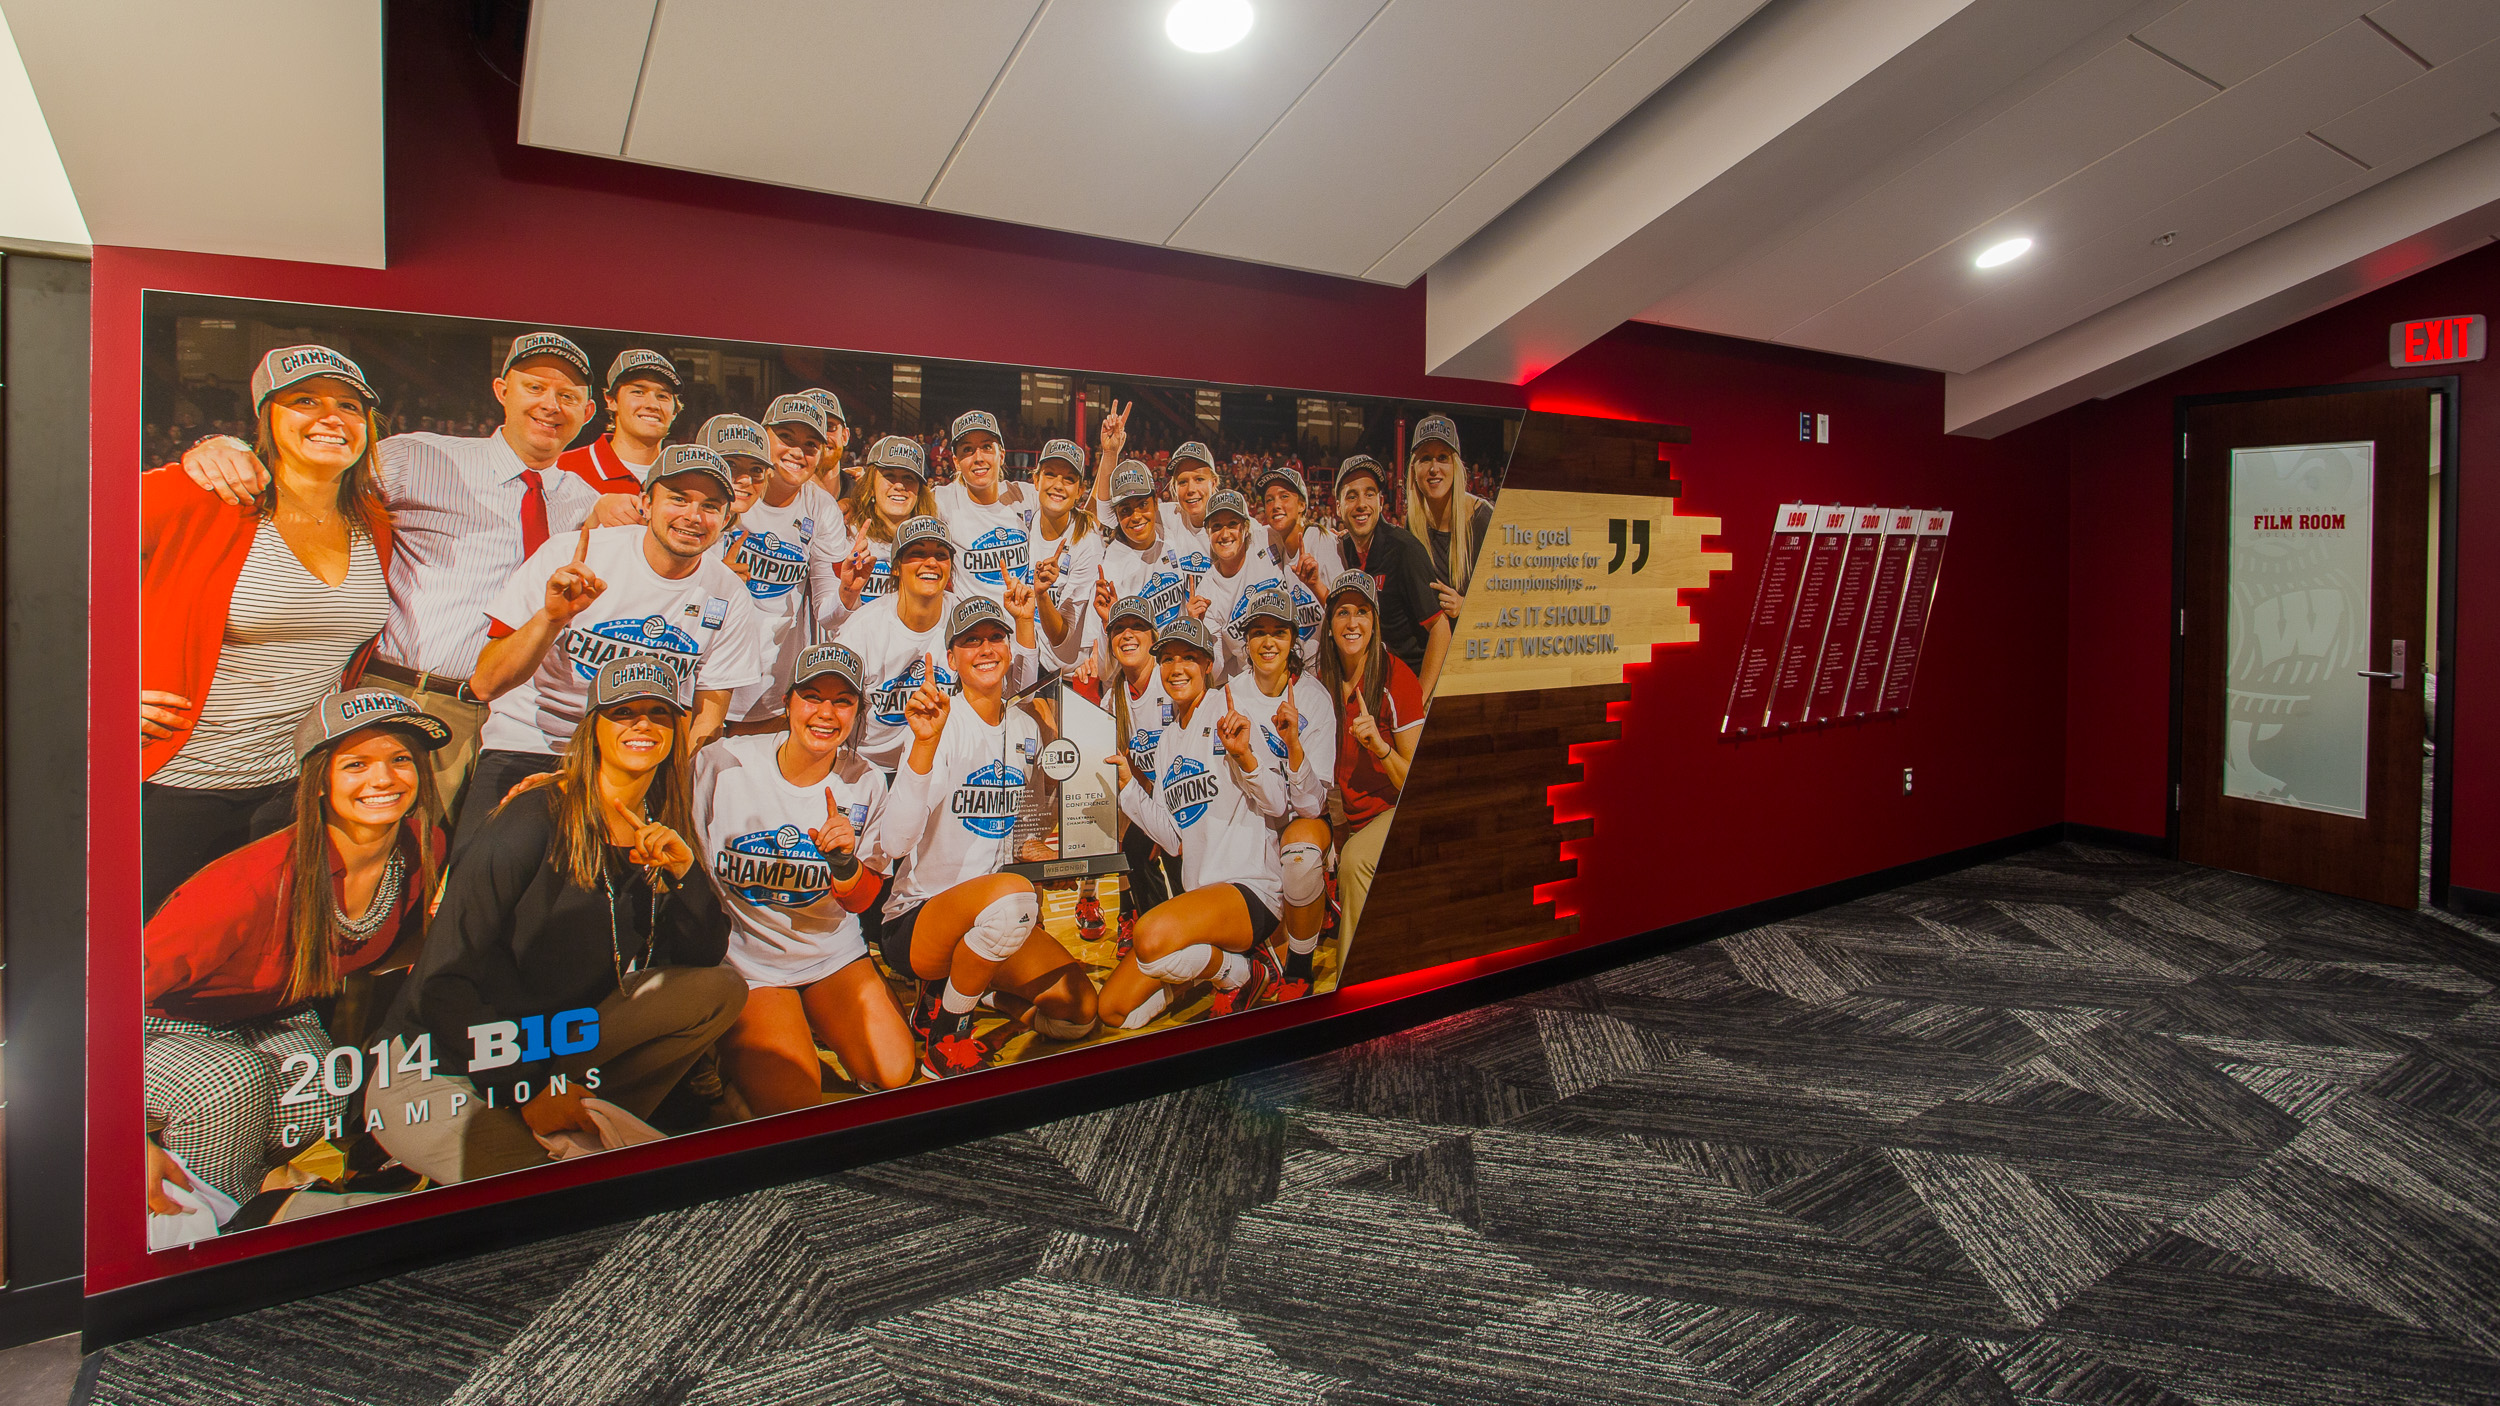 University of Wisconsin - Volleyball Locker Room Feature Wall Backlit Wood Acrylic Lettering Vinyl